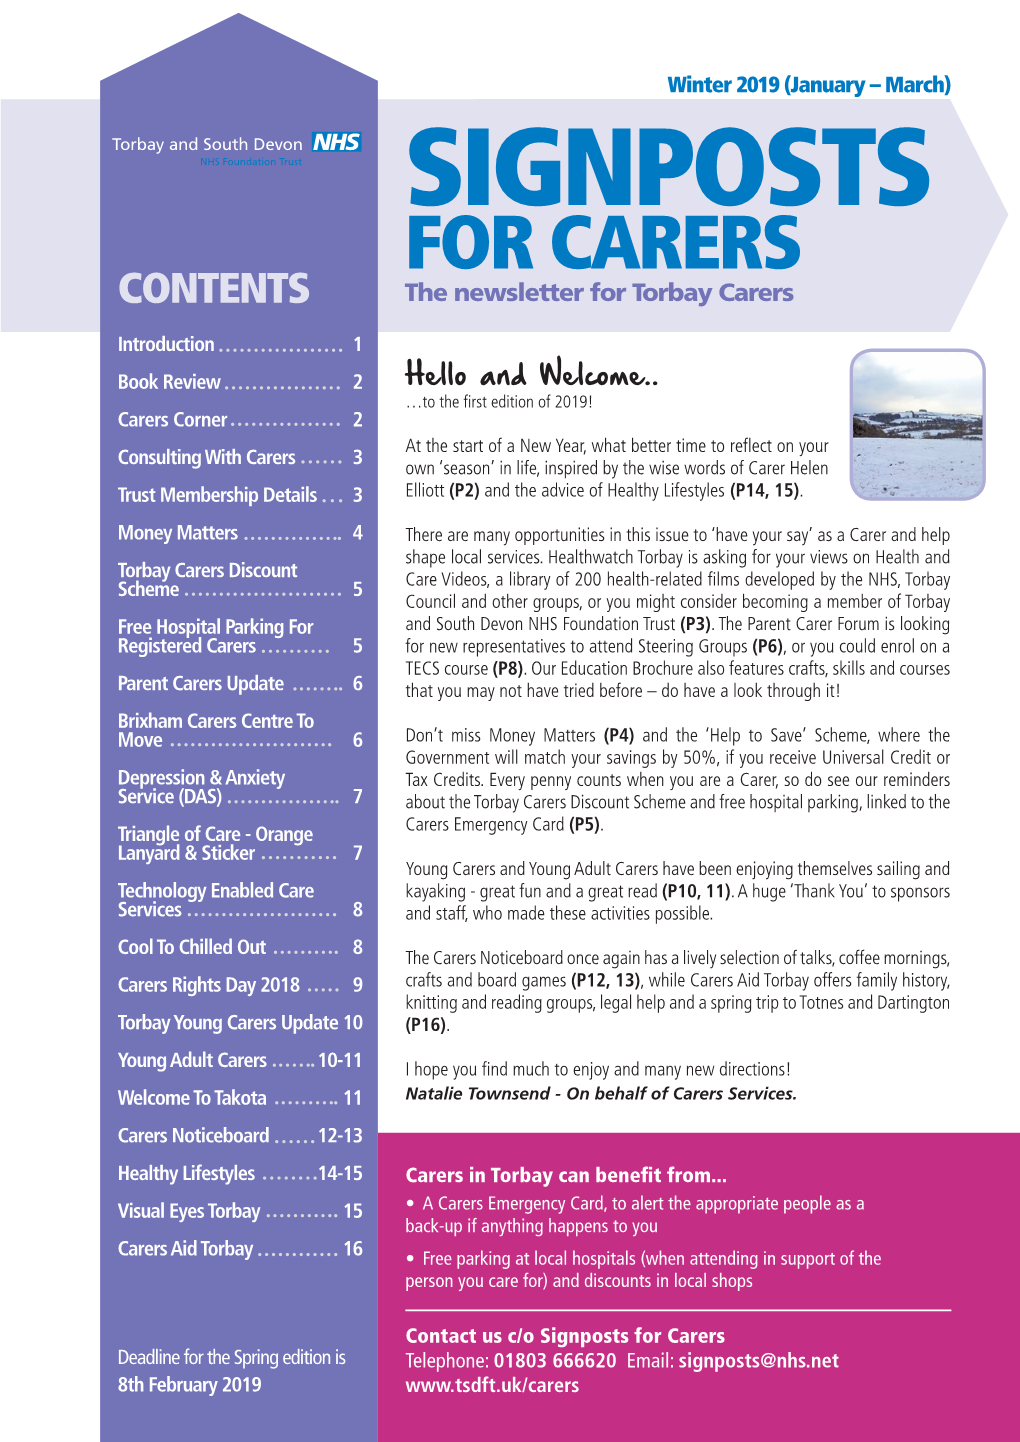 Signposts for Carers Winter 2019